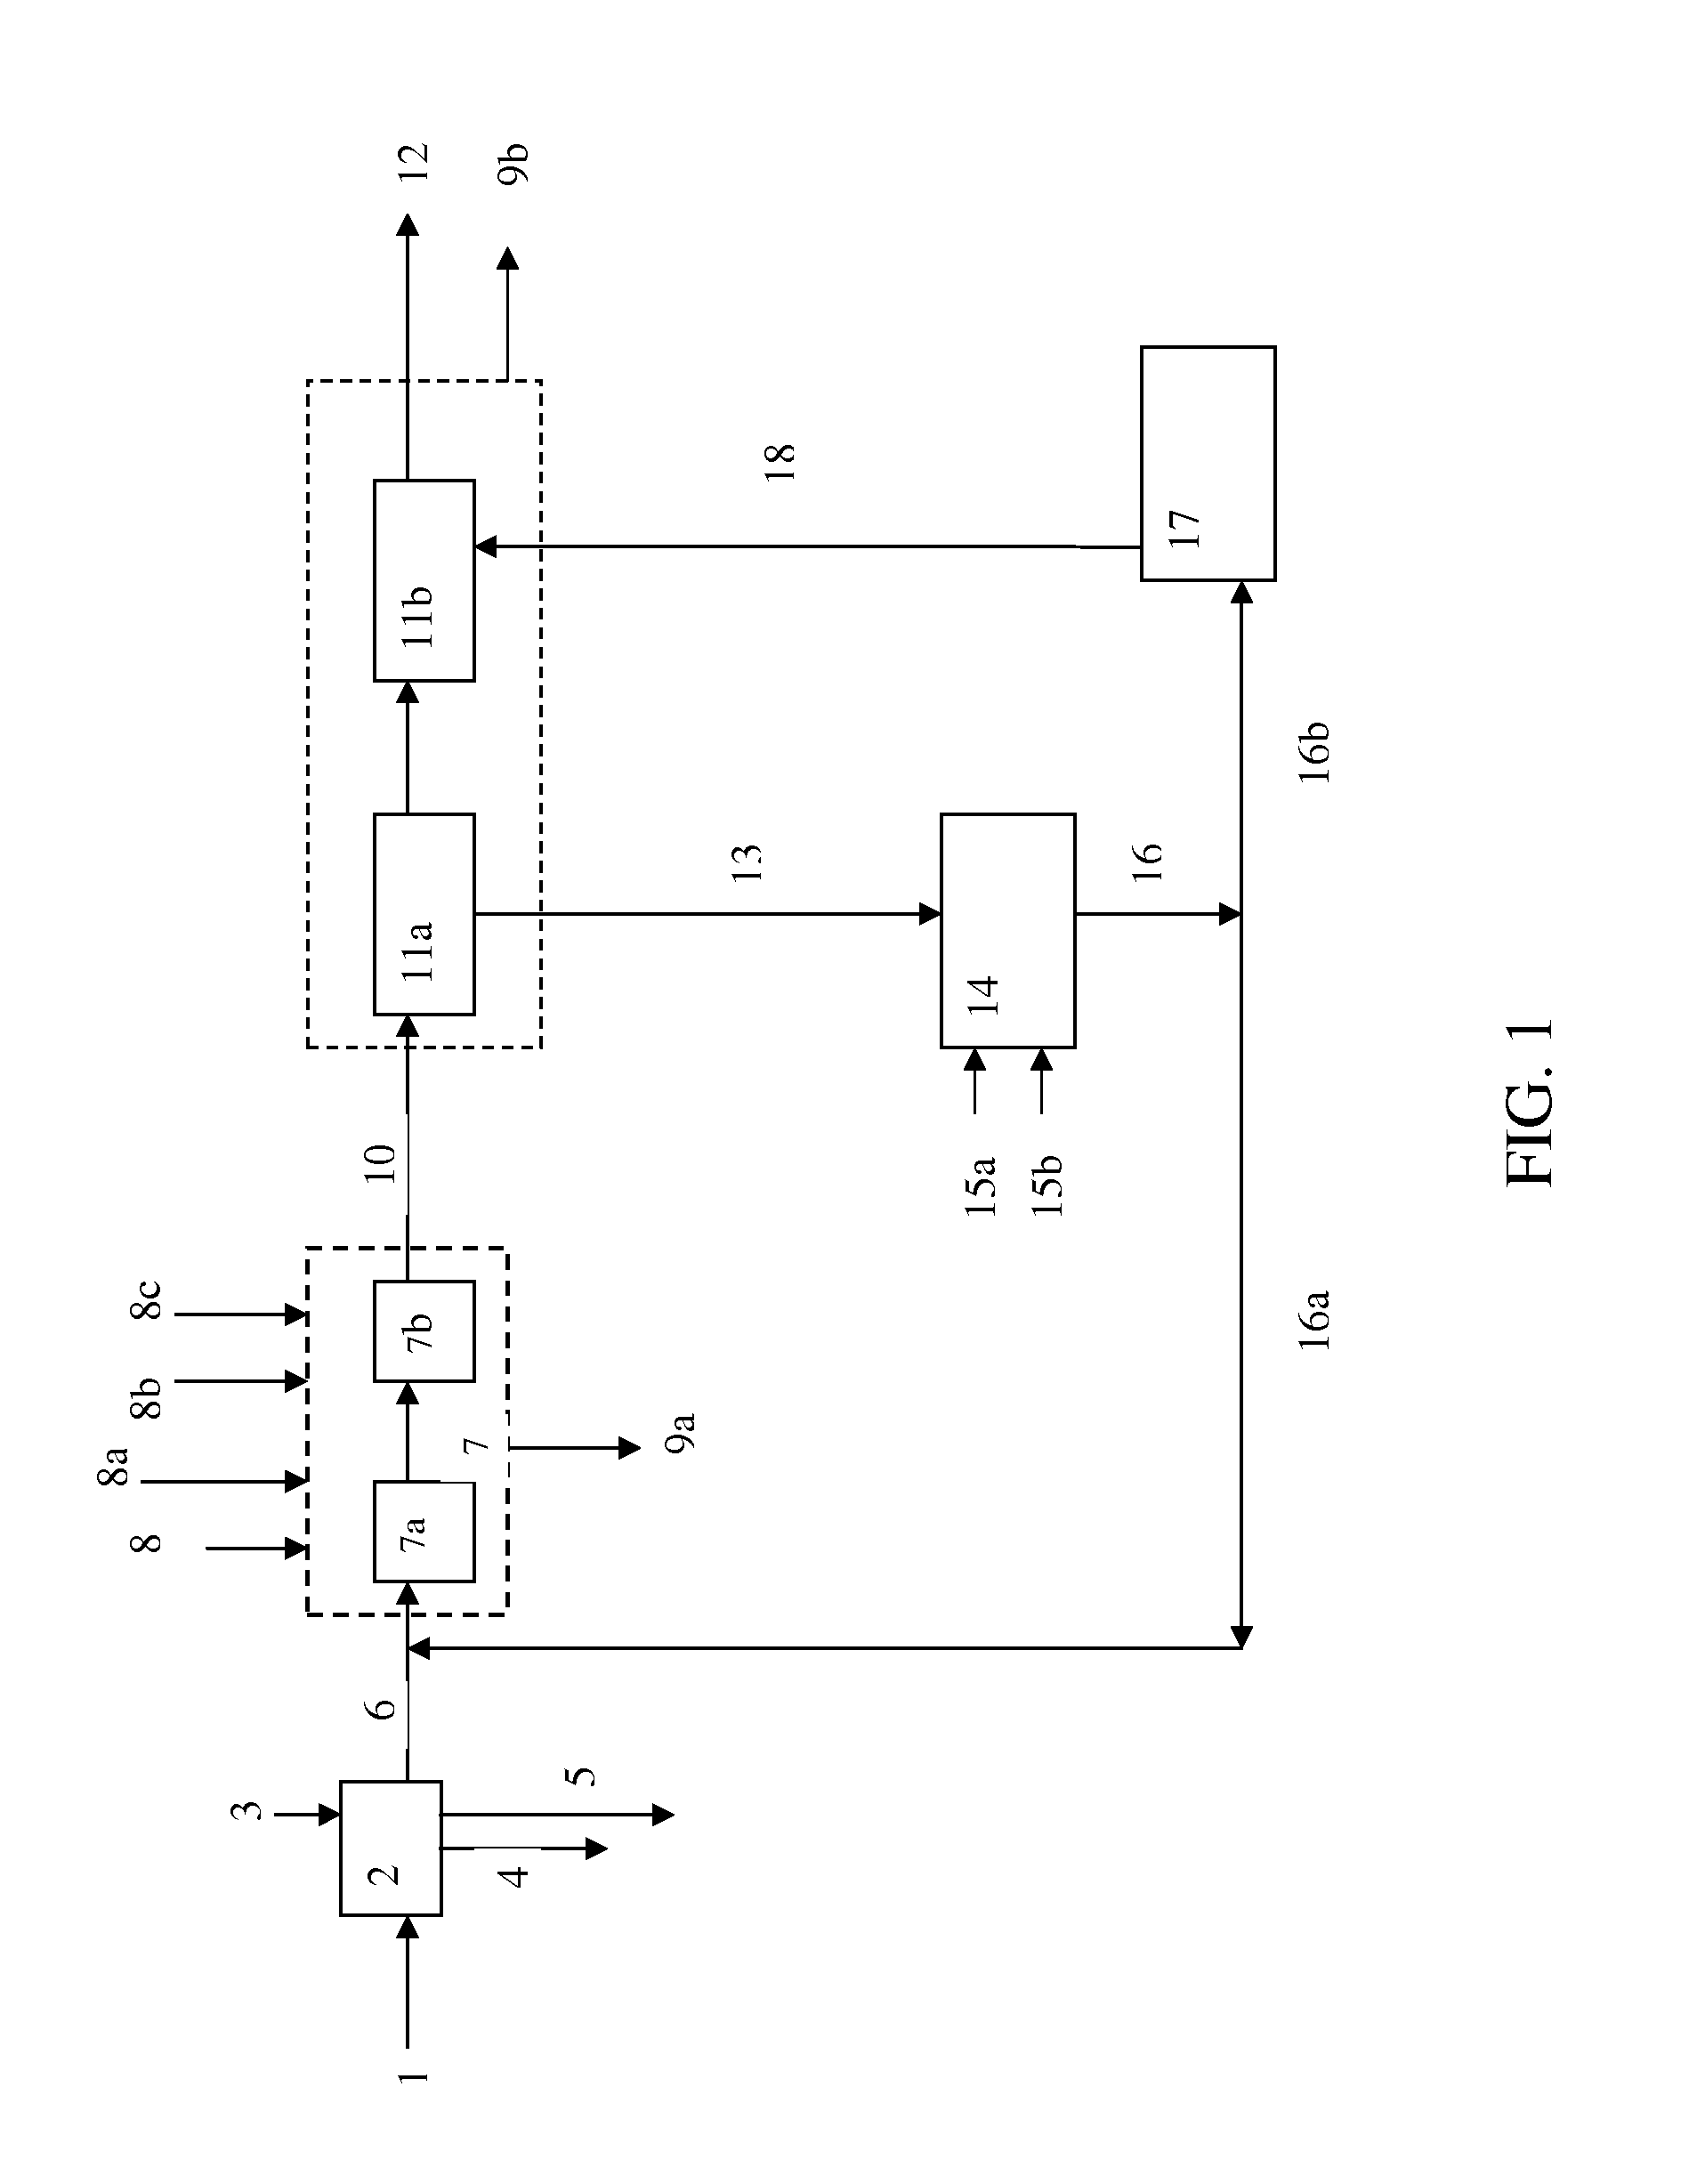 Method for producing ethanol and solvents from lignocellulosic biomass including the recirculation of a butyl wine obtained by fermenting pentoses